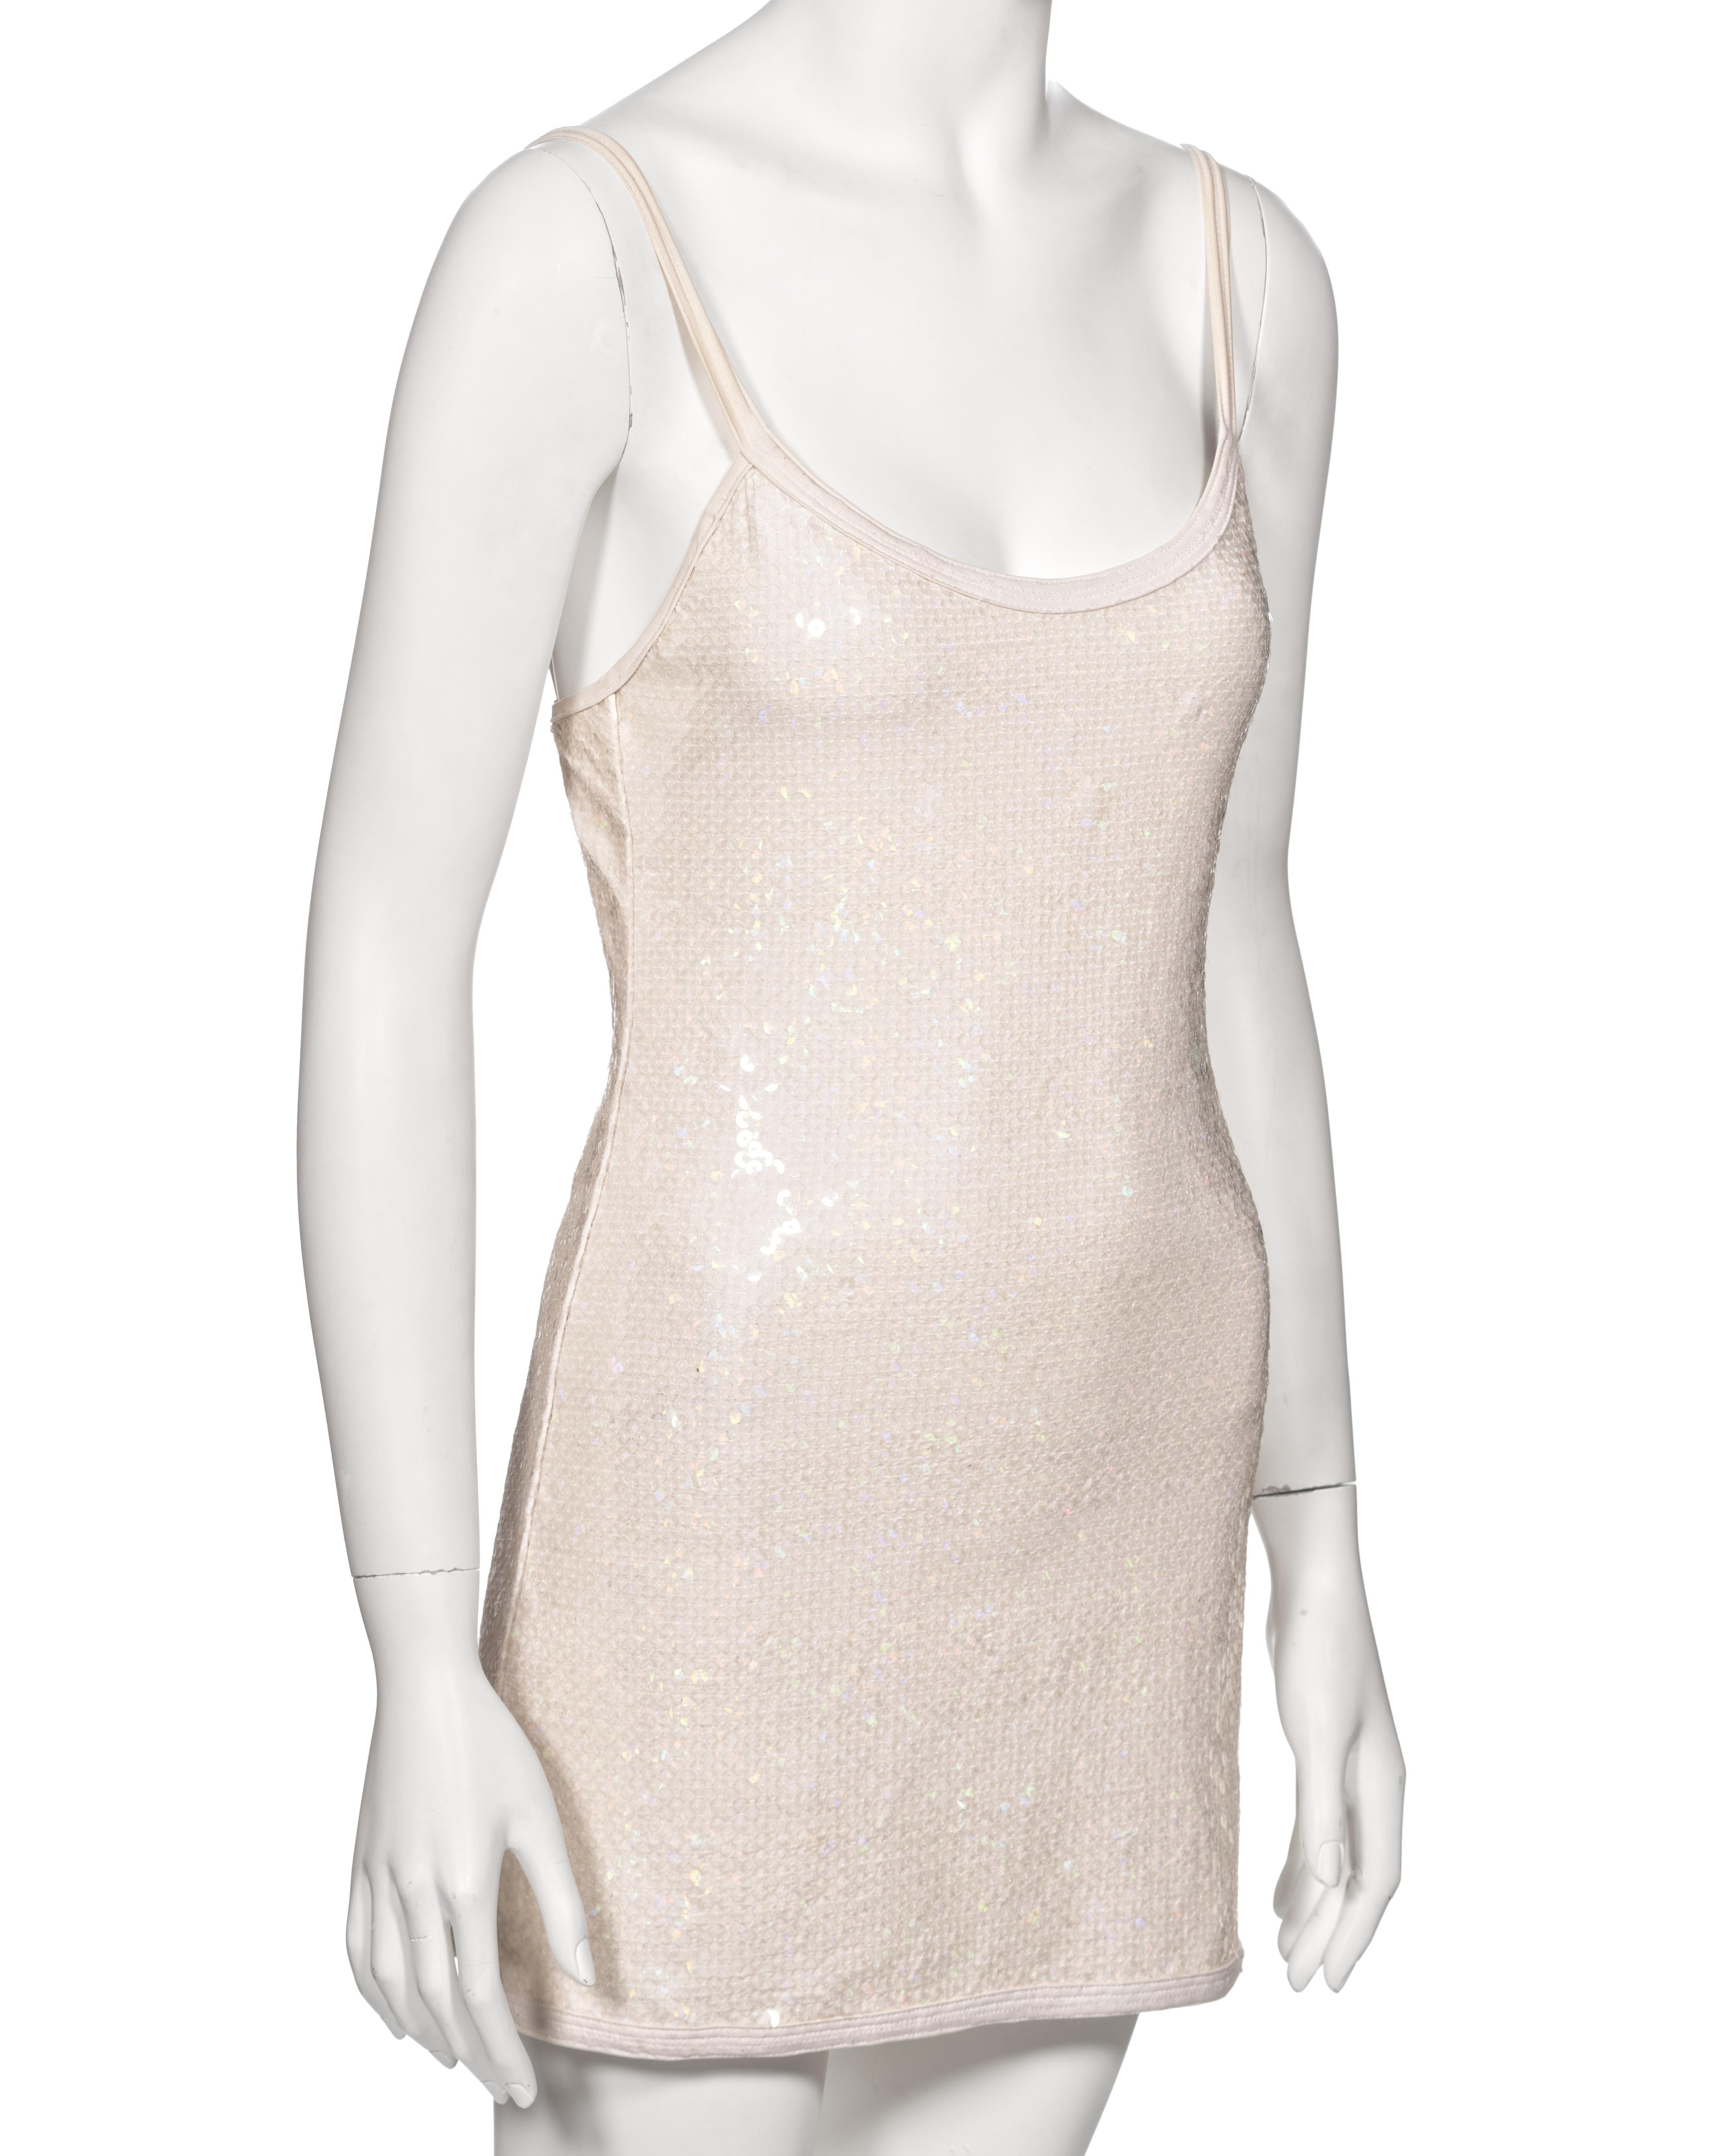 Chanel by Karl Lagerfeld White Iridescent Sequin Mini Dress, ss 2005 2